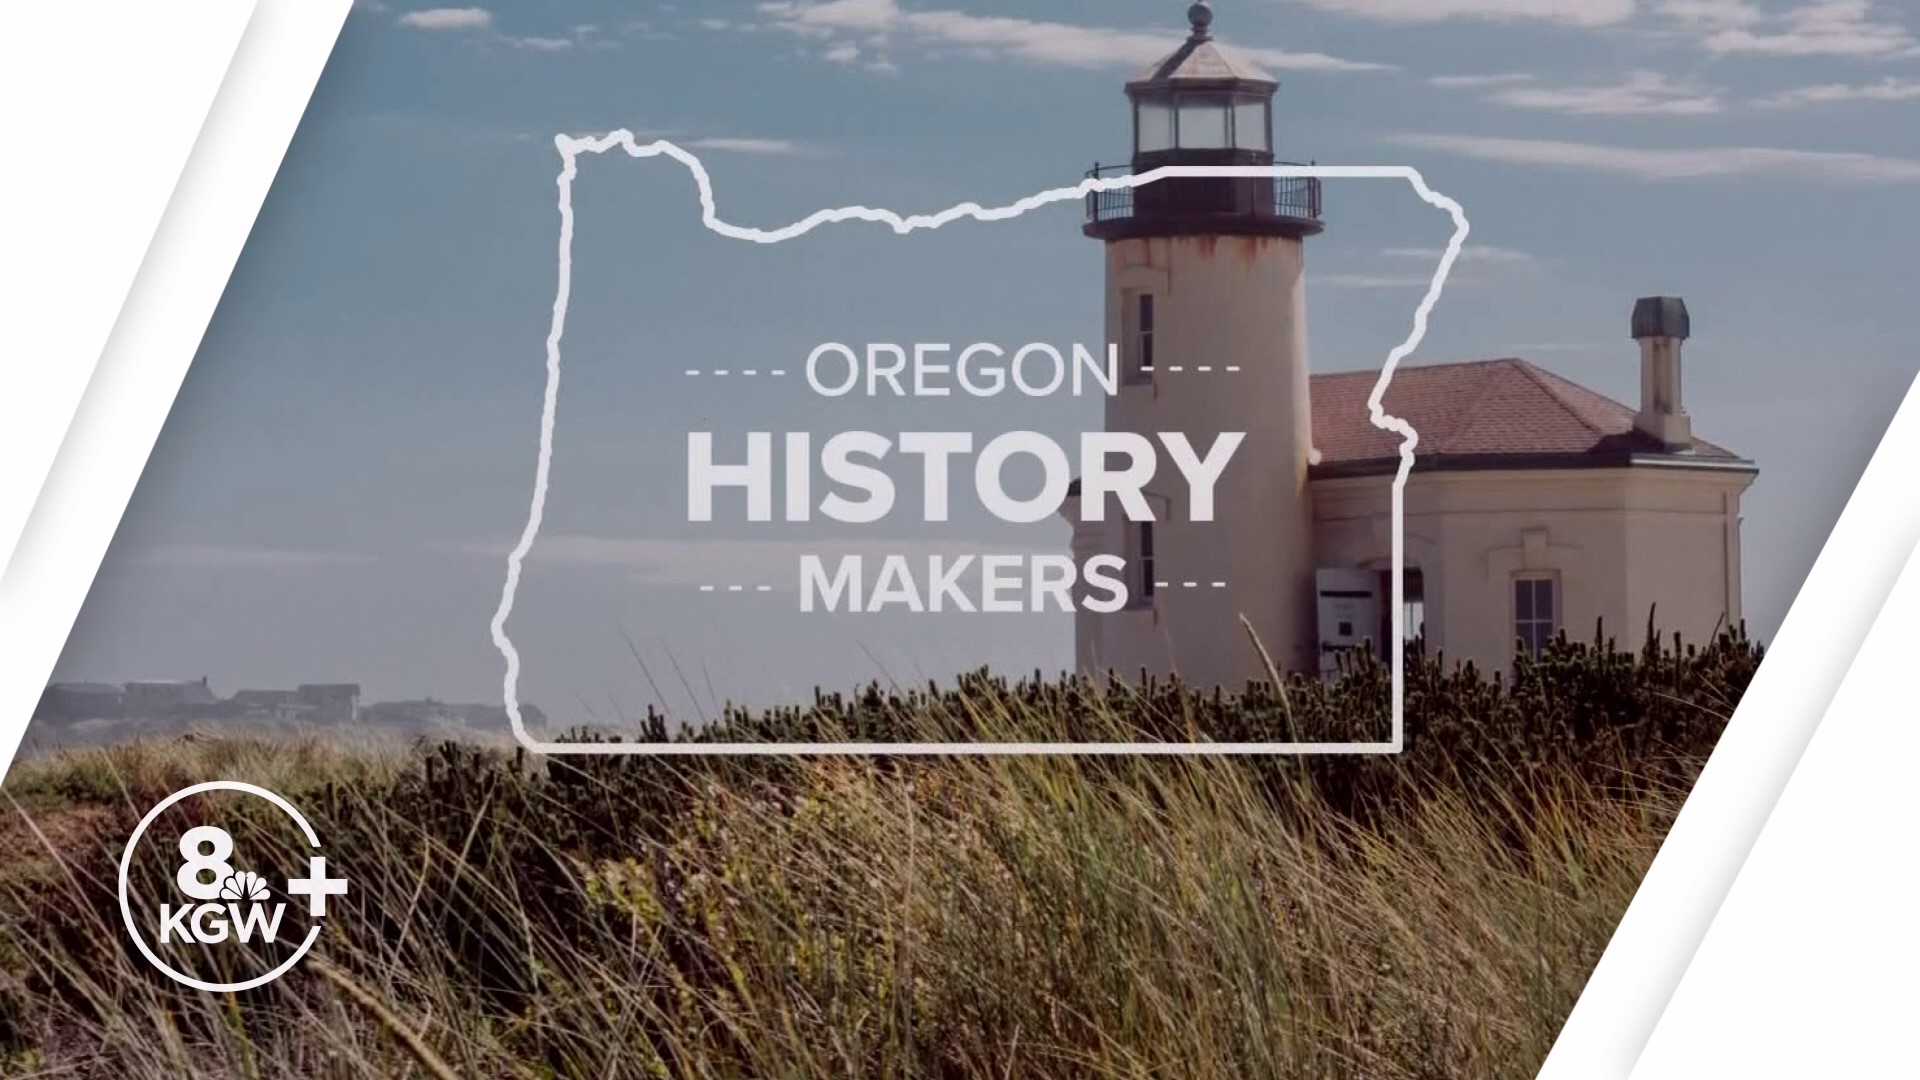 KGW and the Oregon Historical Society present this profile of the 2023 Oregon History Makers